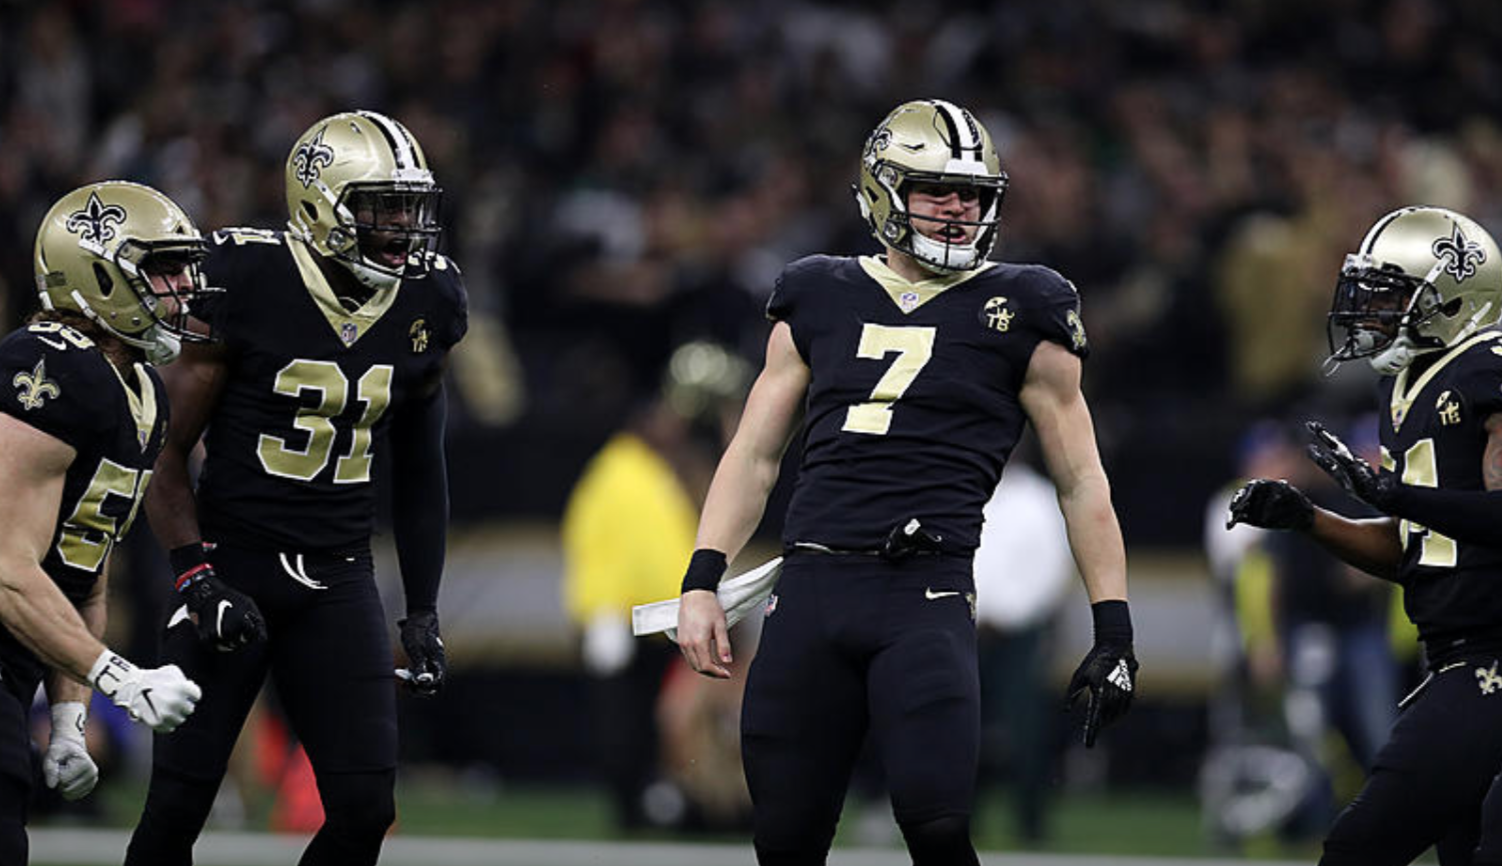 NFC Divisional Home Game: New Orleans Saints vs. TBD (Date: TBD - If Necessary) at Mercedes Benz Superdome